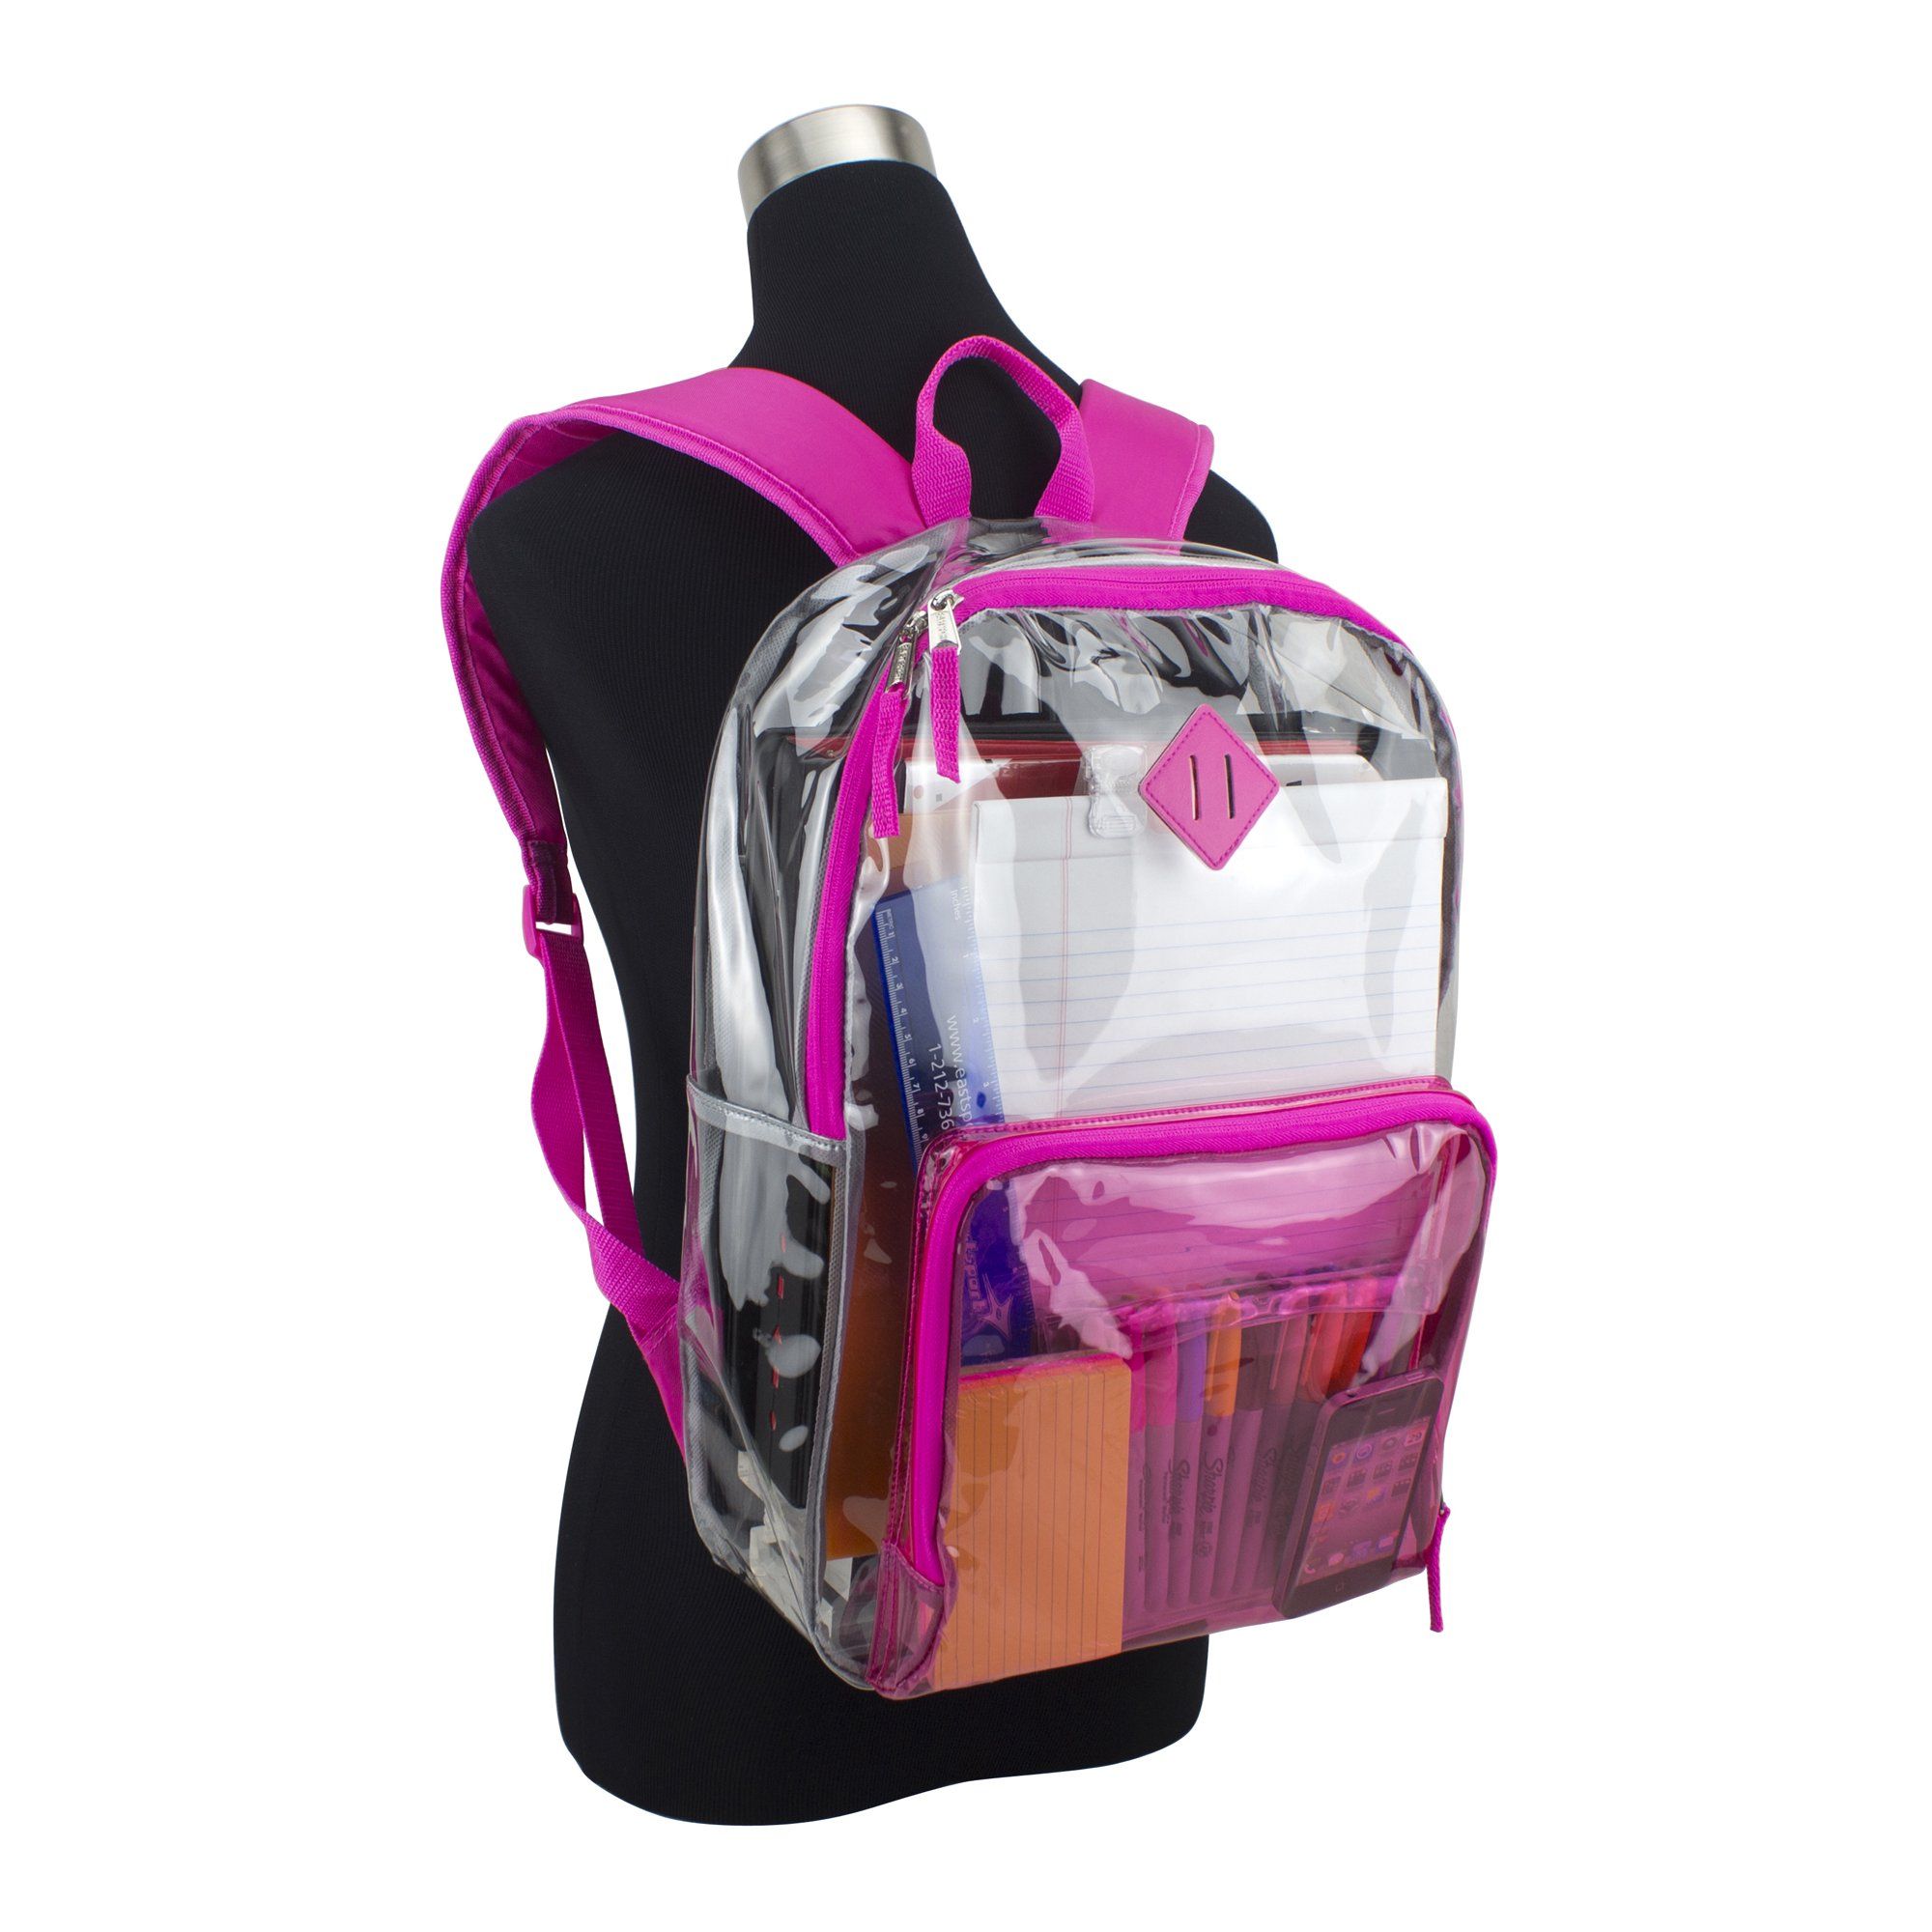 Eastsport Multi-Purpose Clear Unisex Backpack with Front Pocket, Adjustable Straps and Lash Tab | Walmart (US)